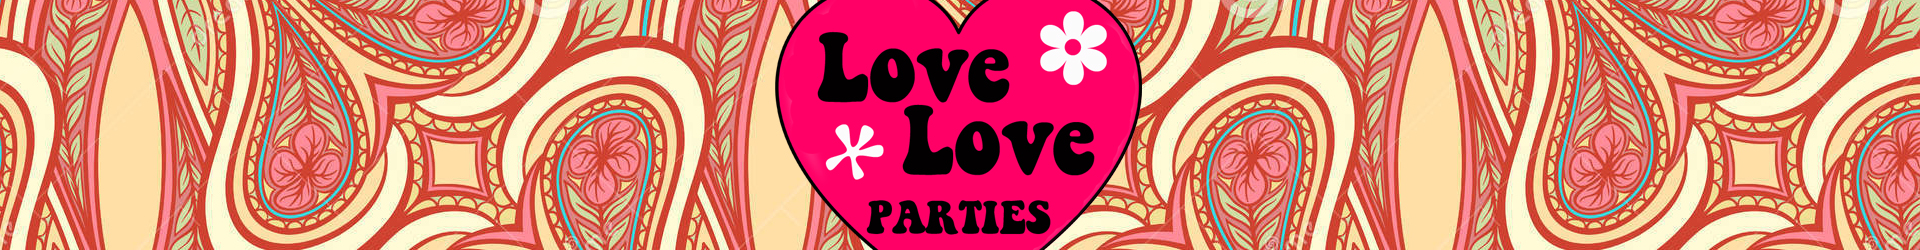 Love Love Parties - Sex Toy Party, Passion Parties, Bachelorette Parties in NYC, New York, New Jersey, Pennsylvania